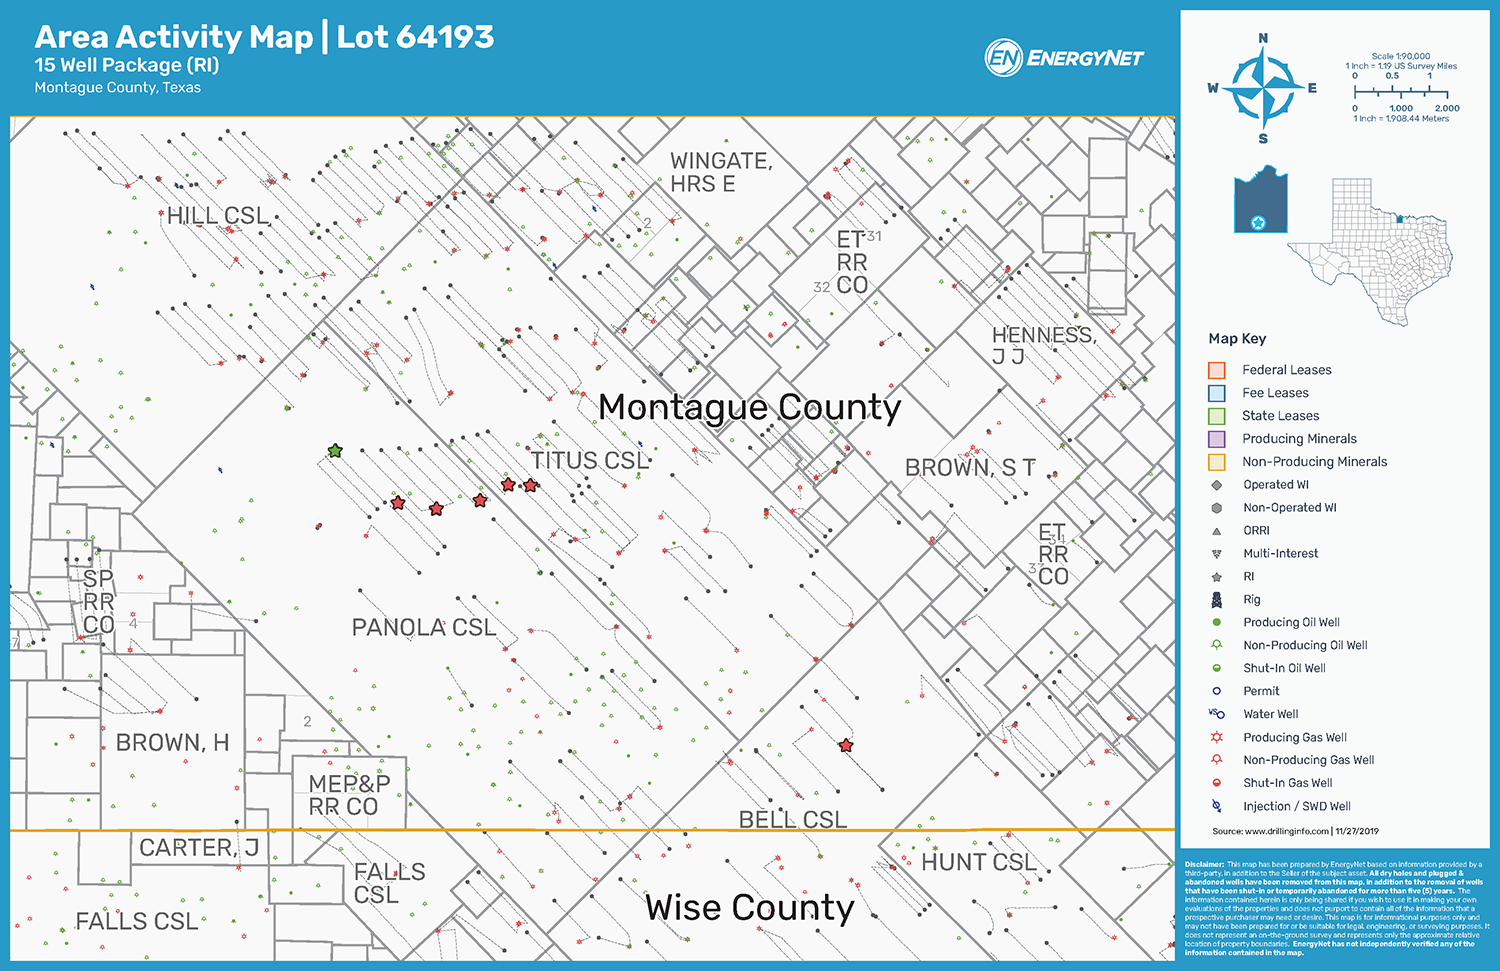 Unit Petroleum Royalty Interest In Producing North Texas Wells Asset Map Montague County (Source: EnergyNet)